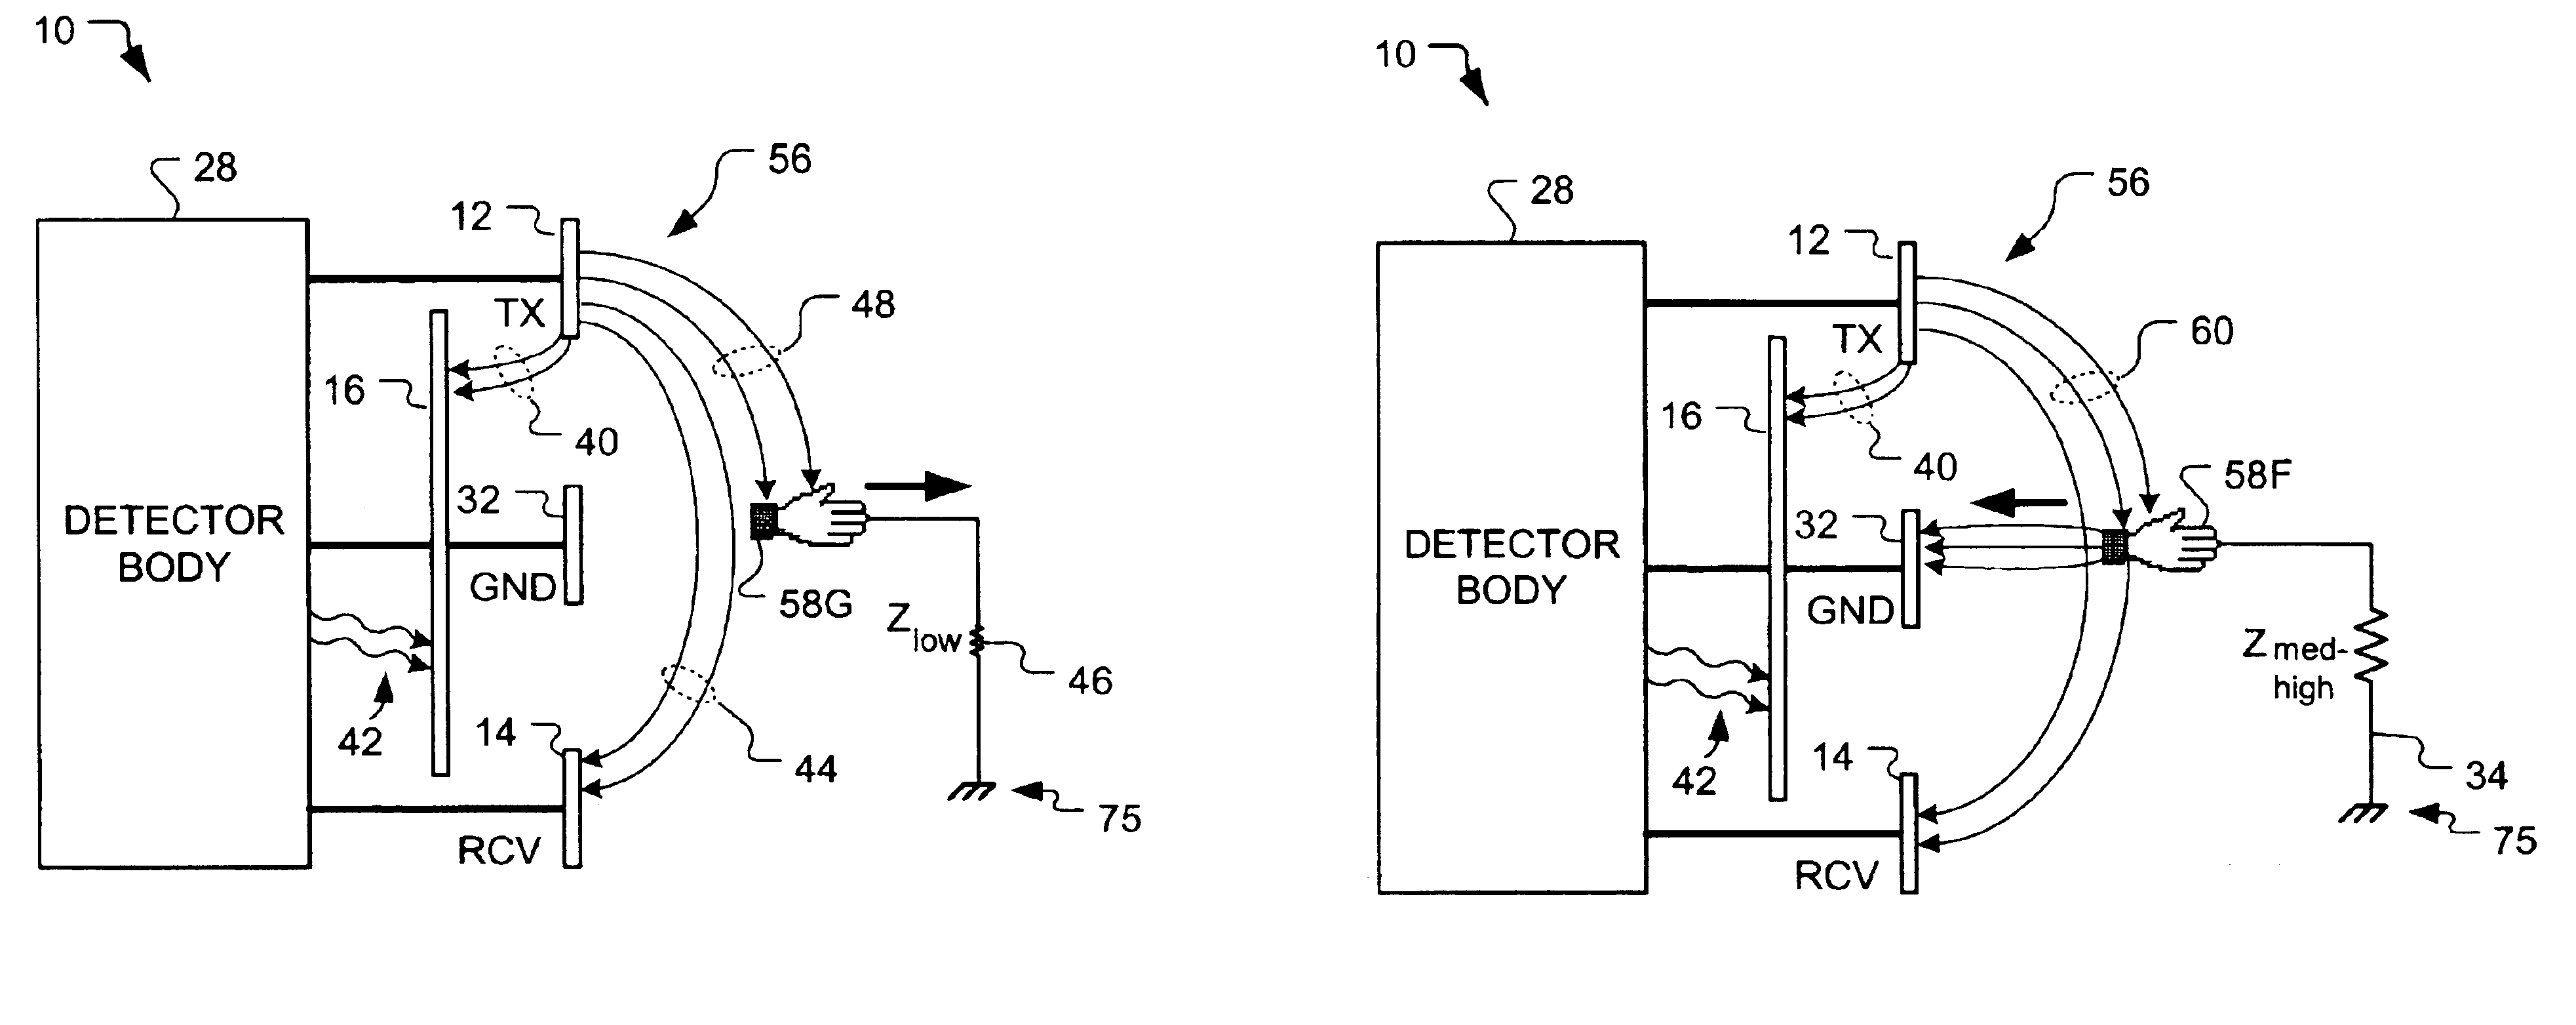 Electric field proximity detector for floating and grounded targets